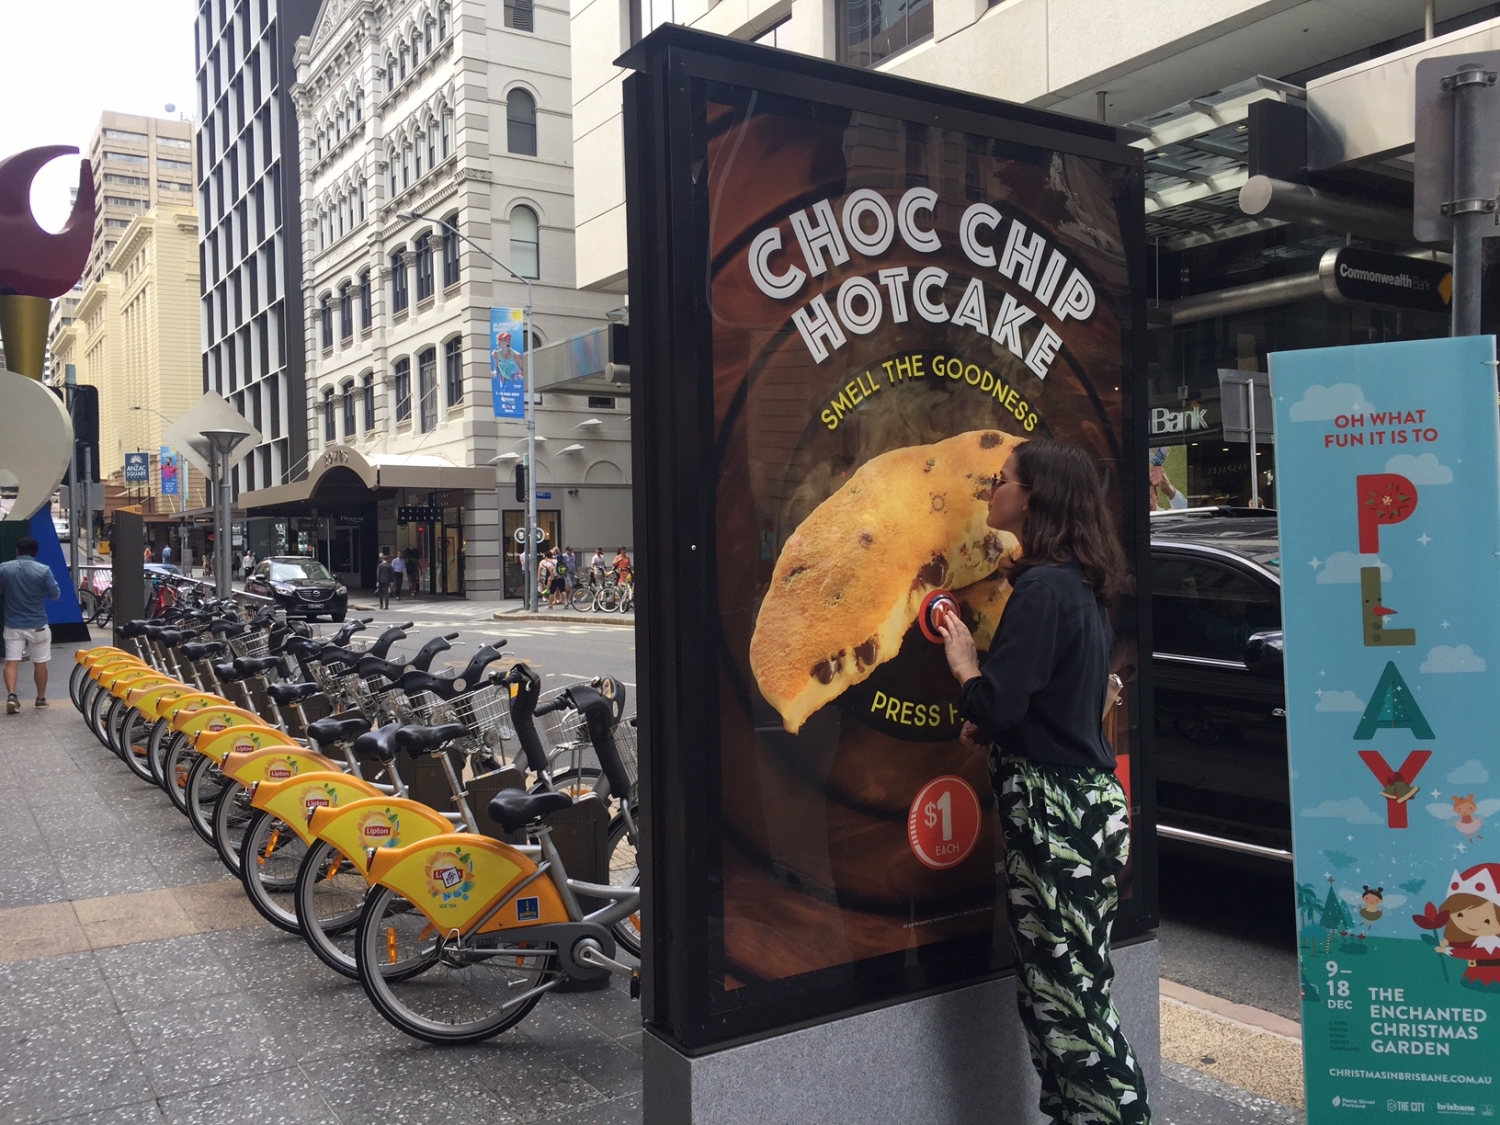 McDonald’s Advertising New Choc Chip Hotcakes – Smell the Goodness!